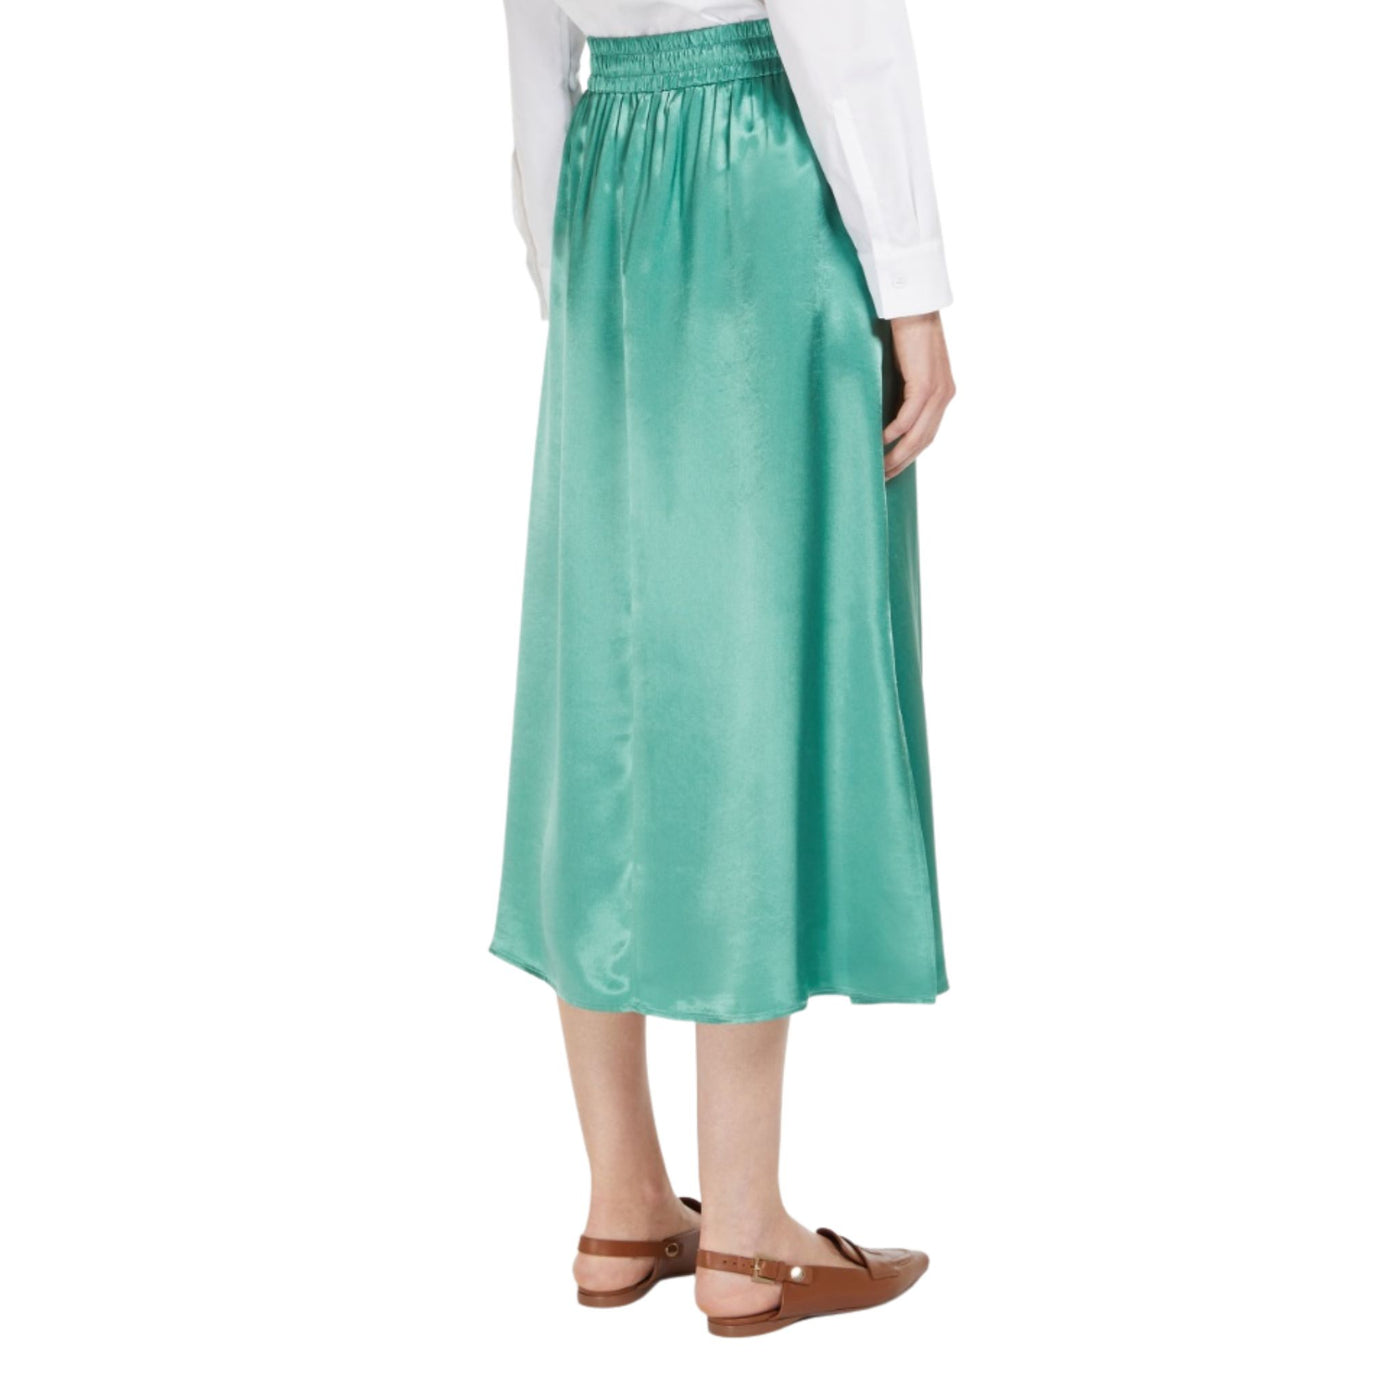 Women's skirt with French pockets